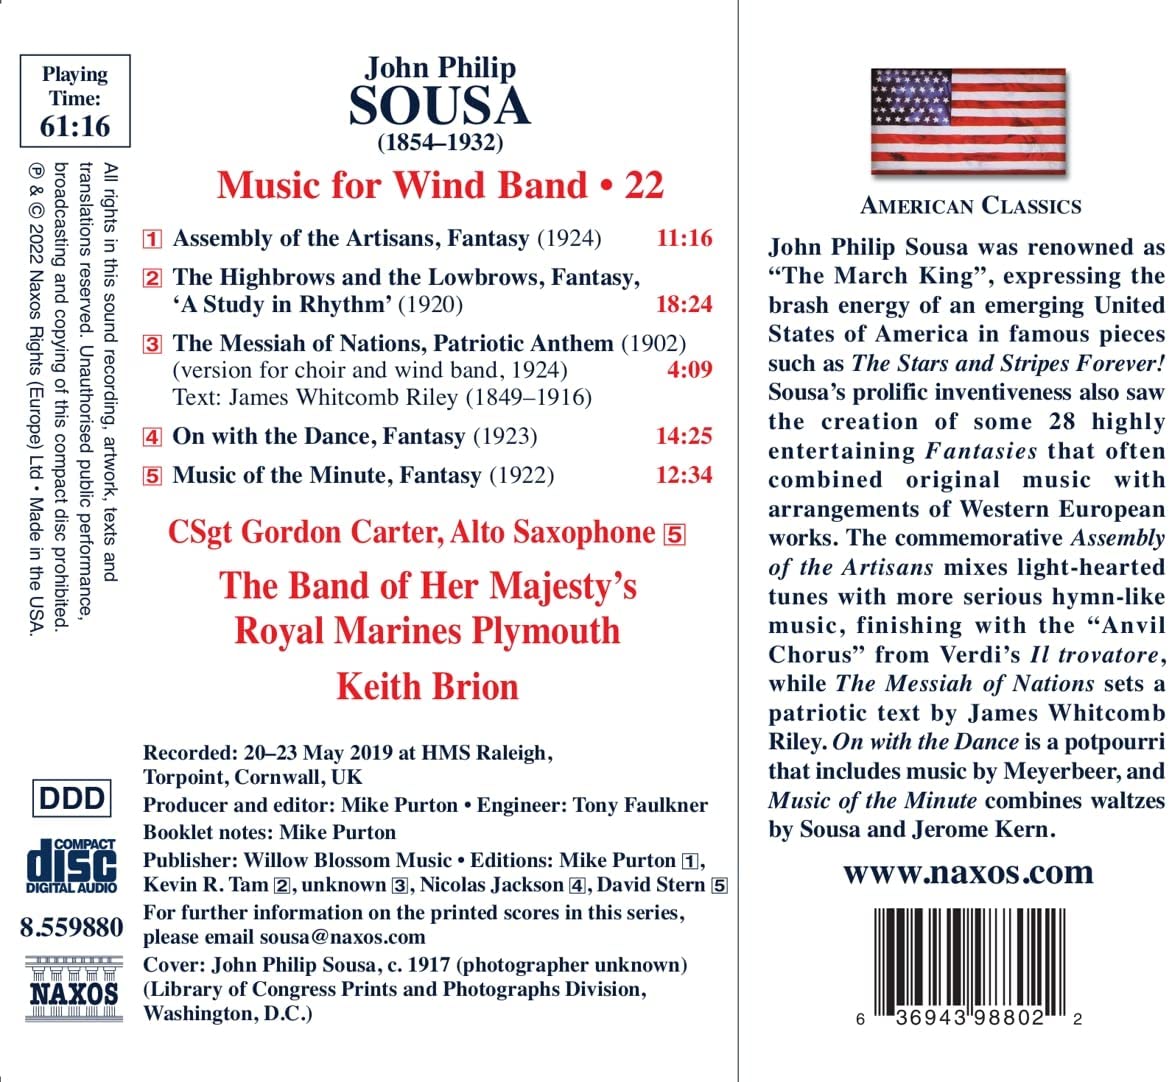 The Band of Her Majesty's Royal Marines Plymouth 존 필립 수자: 관악 밴드를 위한 작품 22집 (John Philip Sousa: Music For Wind Band Music 22) 